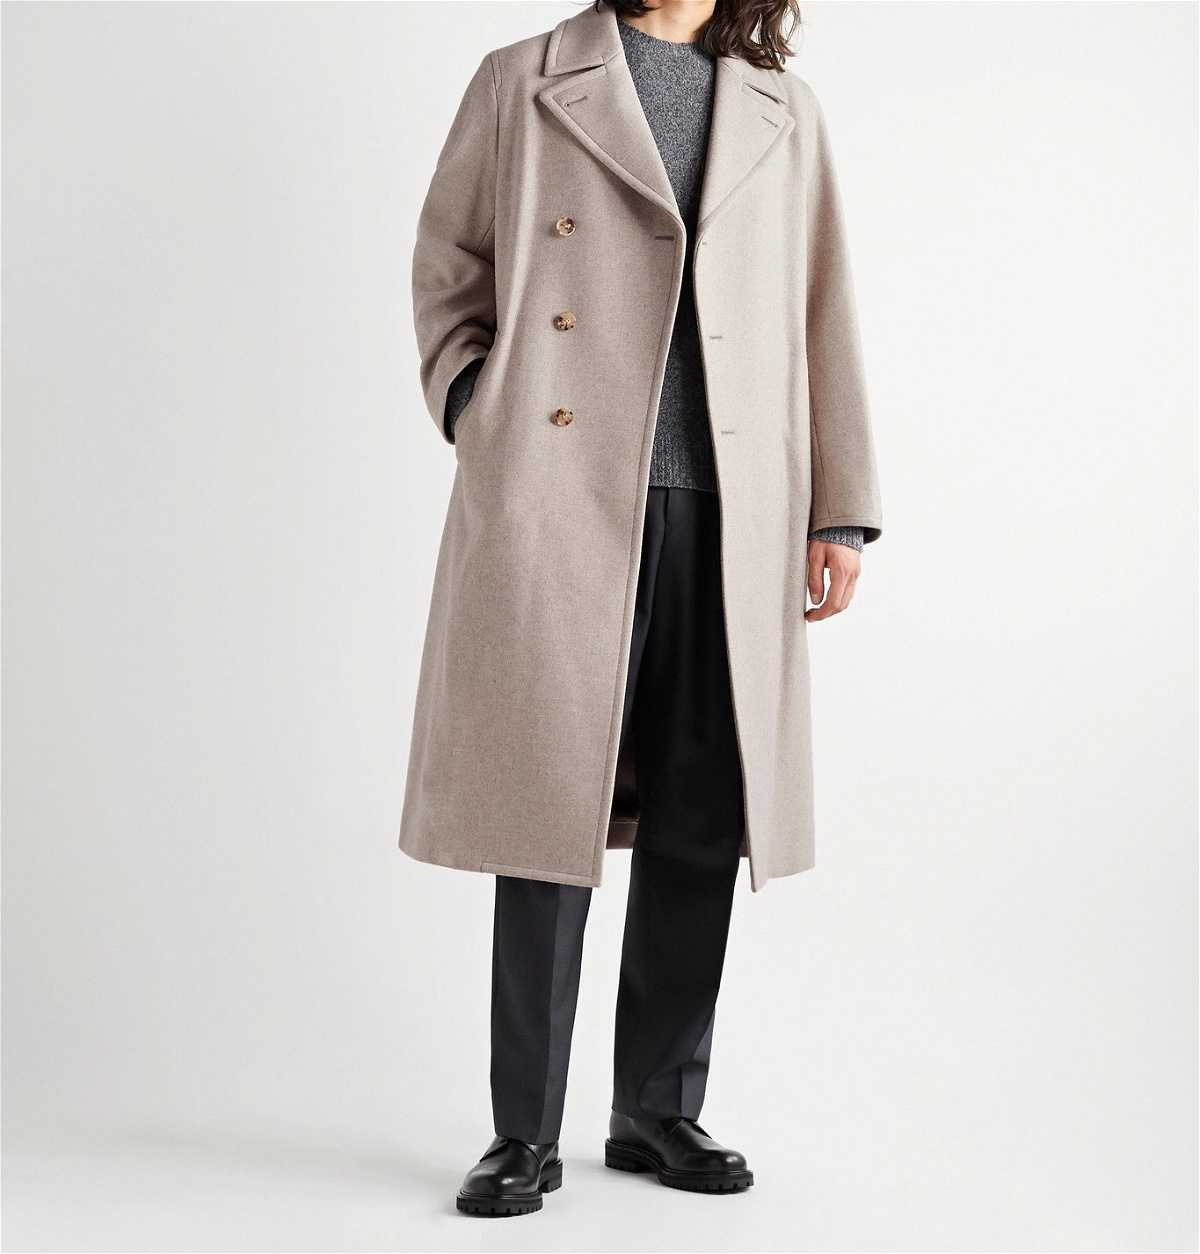 Auralee - Belted Double-Breasted Mélange Wool Coat - Neutrals Auralee